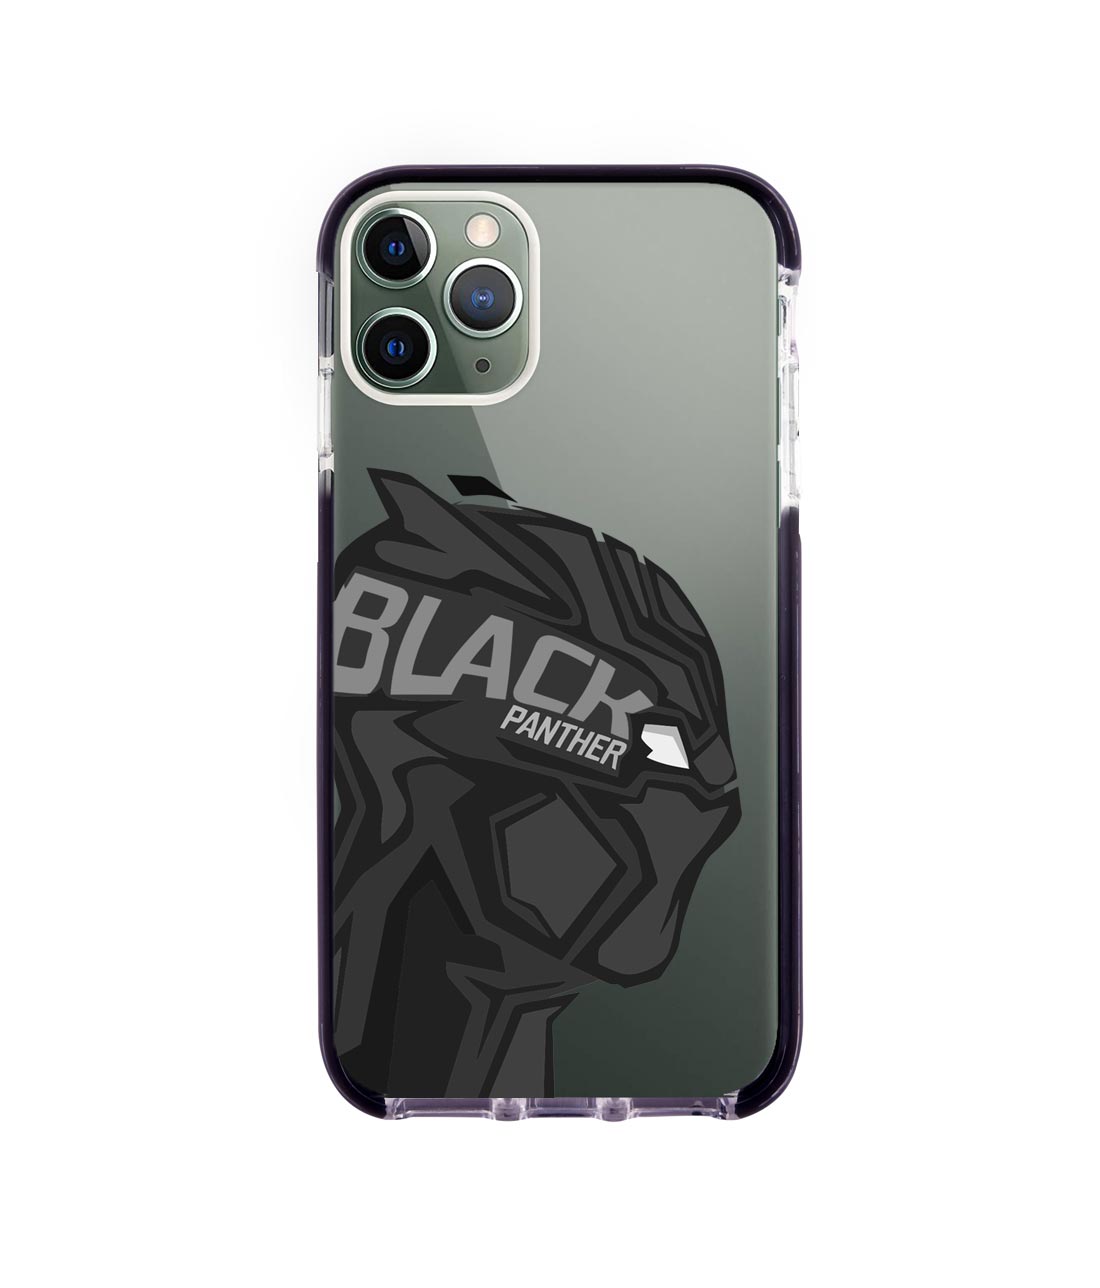 Black Panther Art - Extreme Phone Case for iPhone 11 Pro